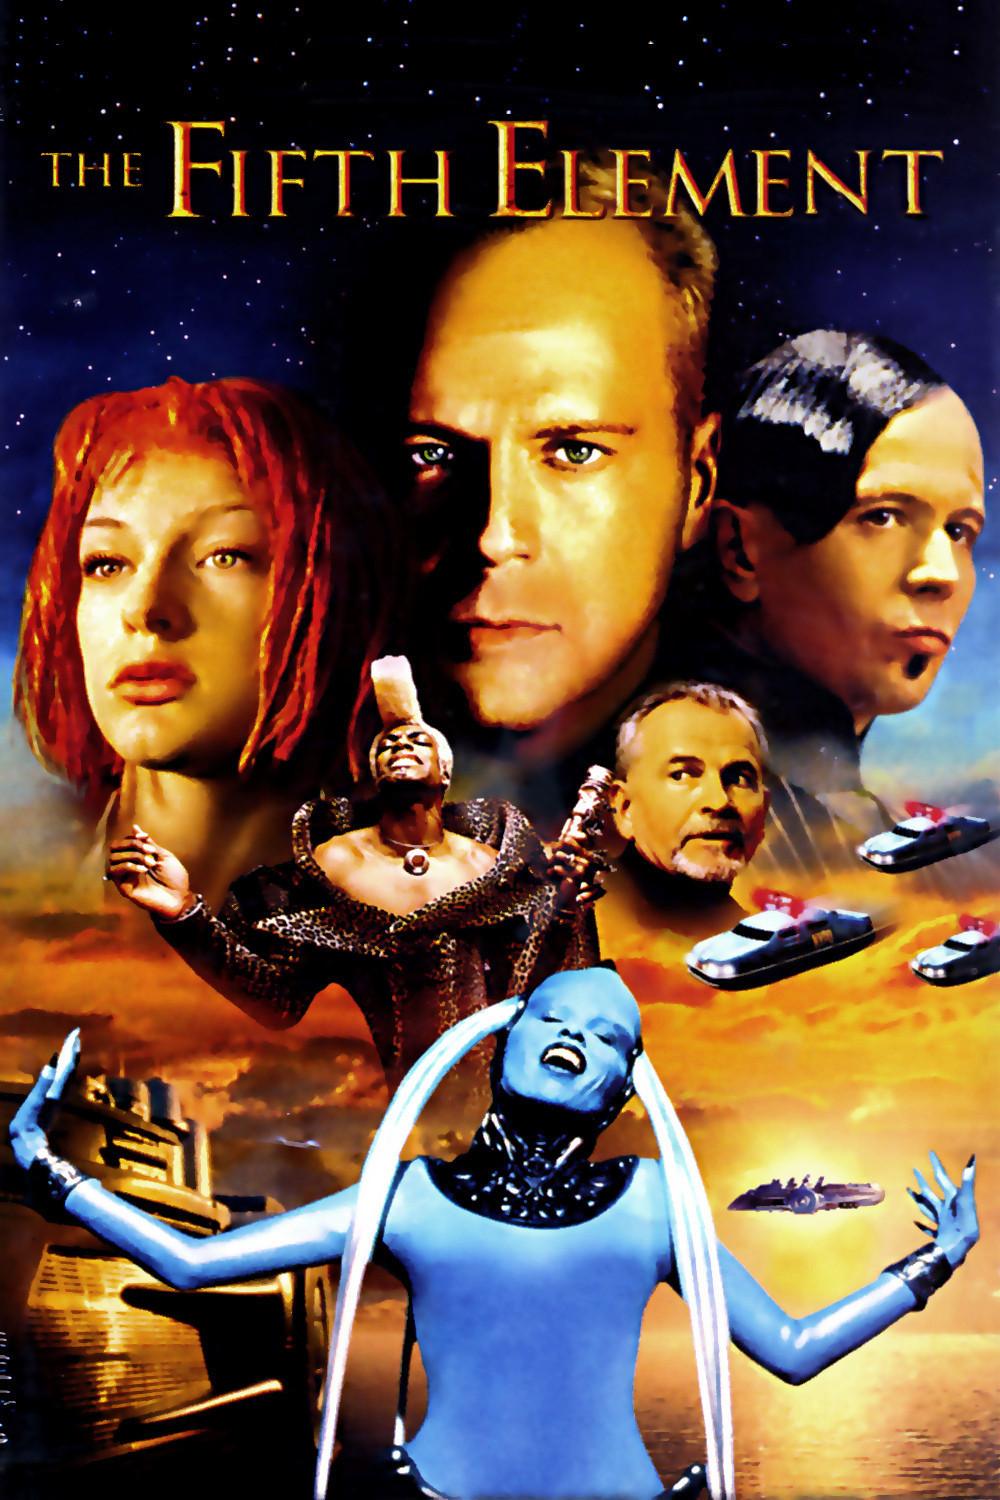 728x409px The Fifth Element 168.11 KB